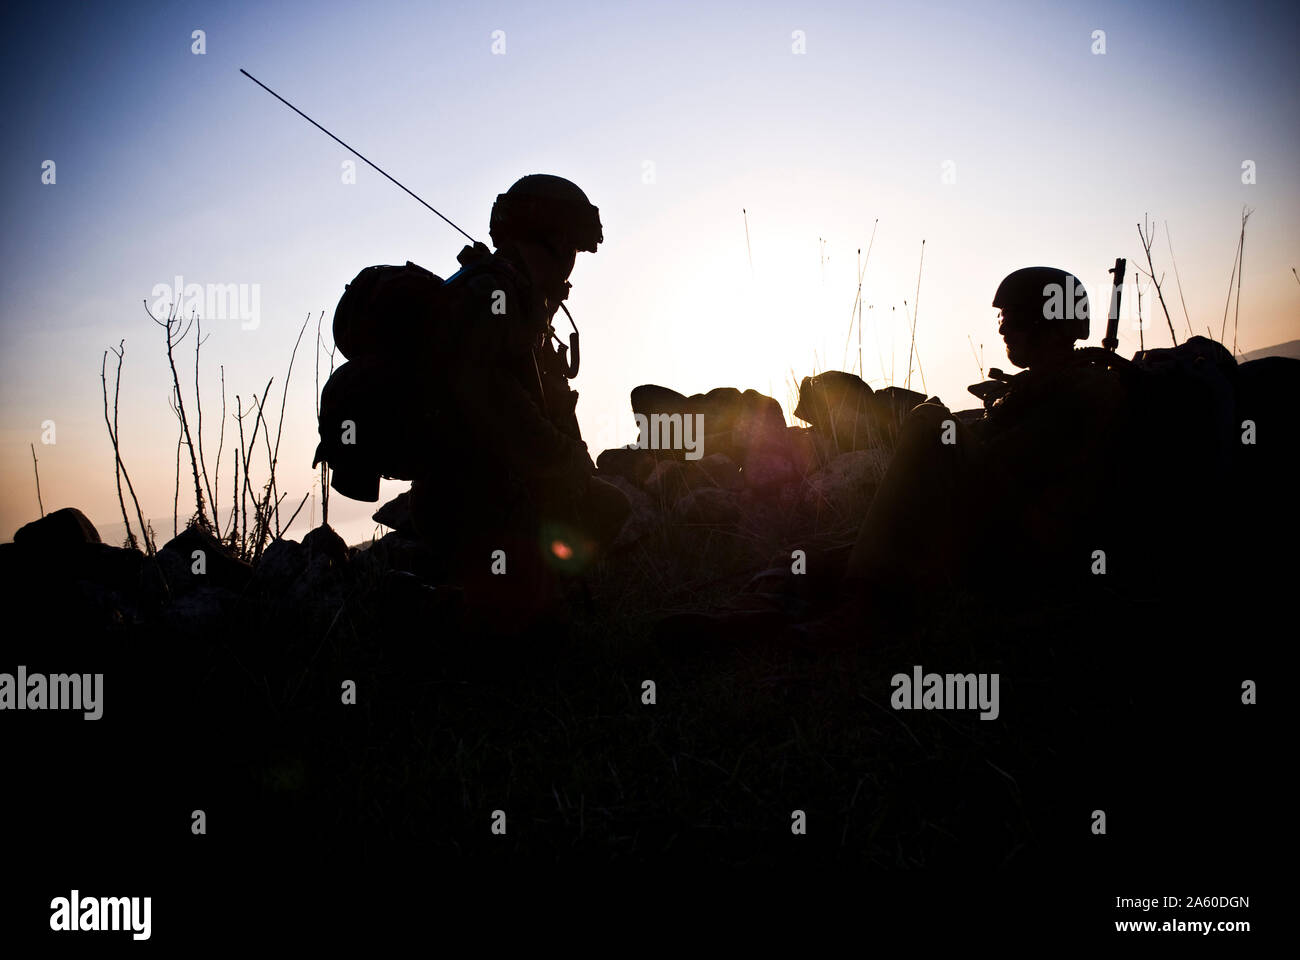 A silhouette of the military person on a background of a sunset Stock Photo